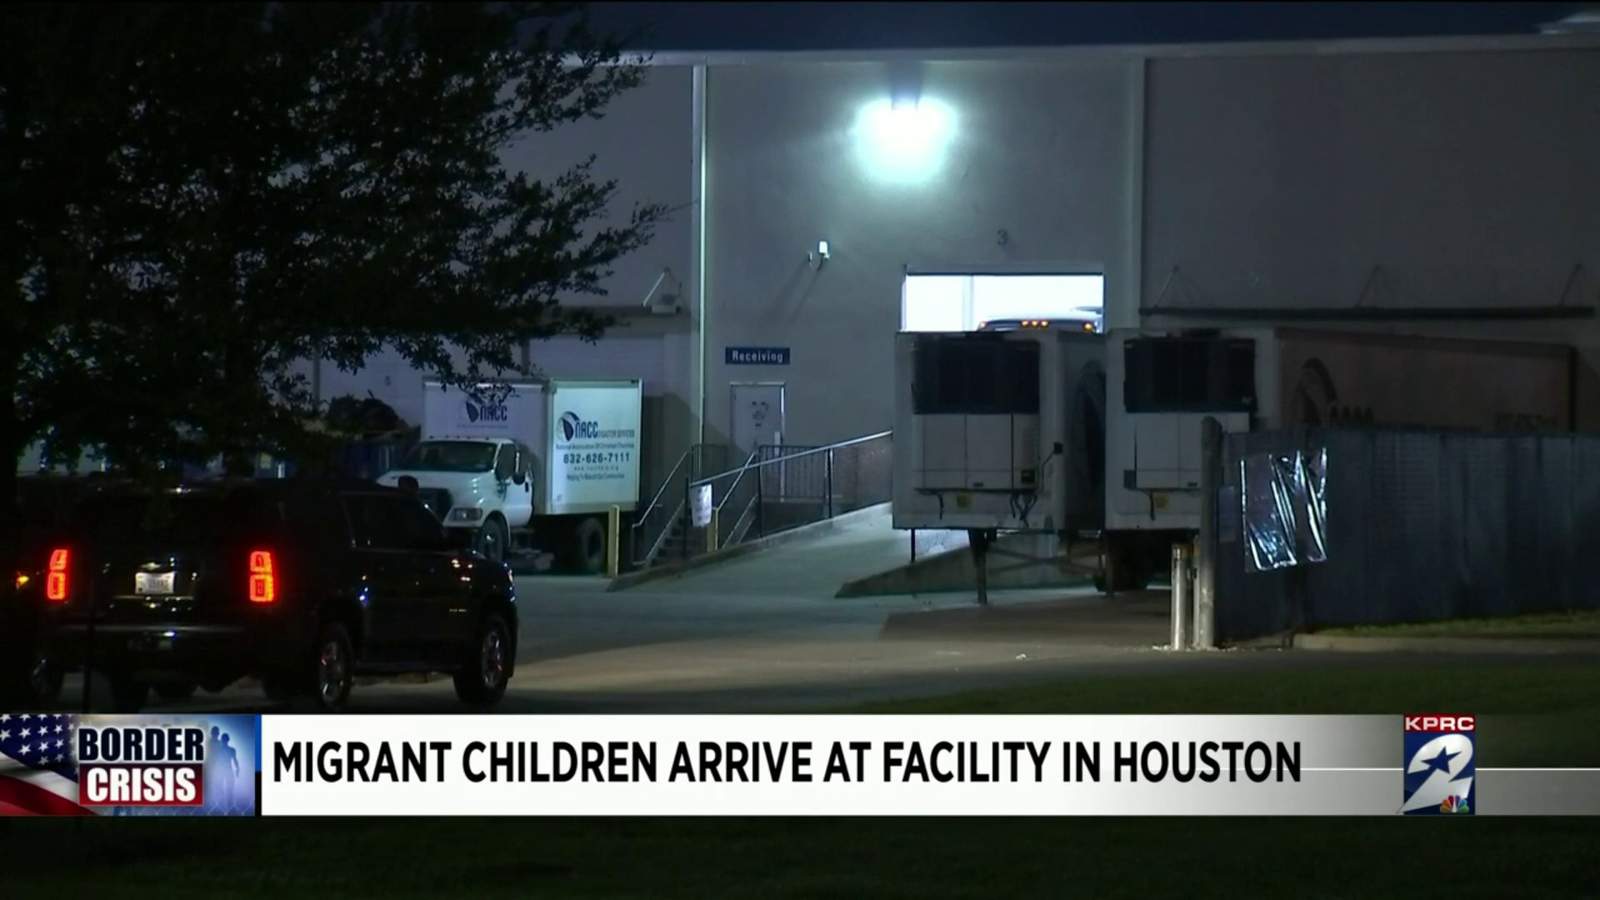 300 migrant girls sheltering at new Houston facility, congresswoman says